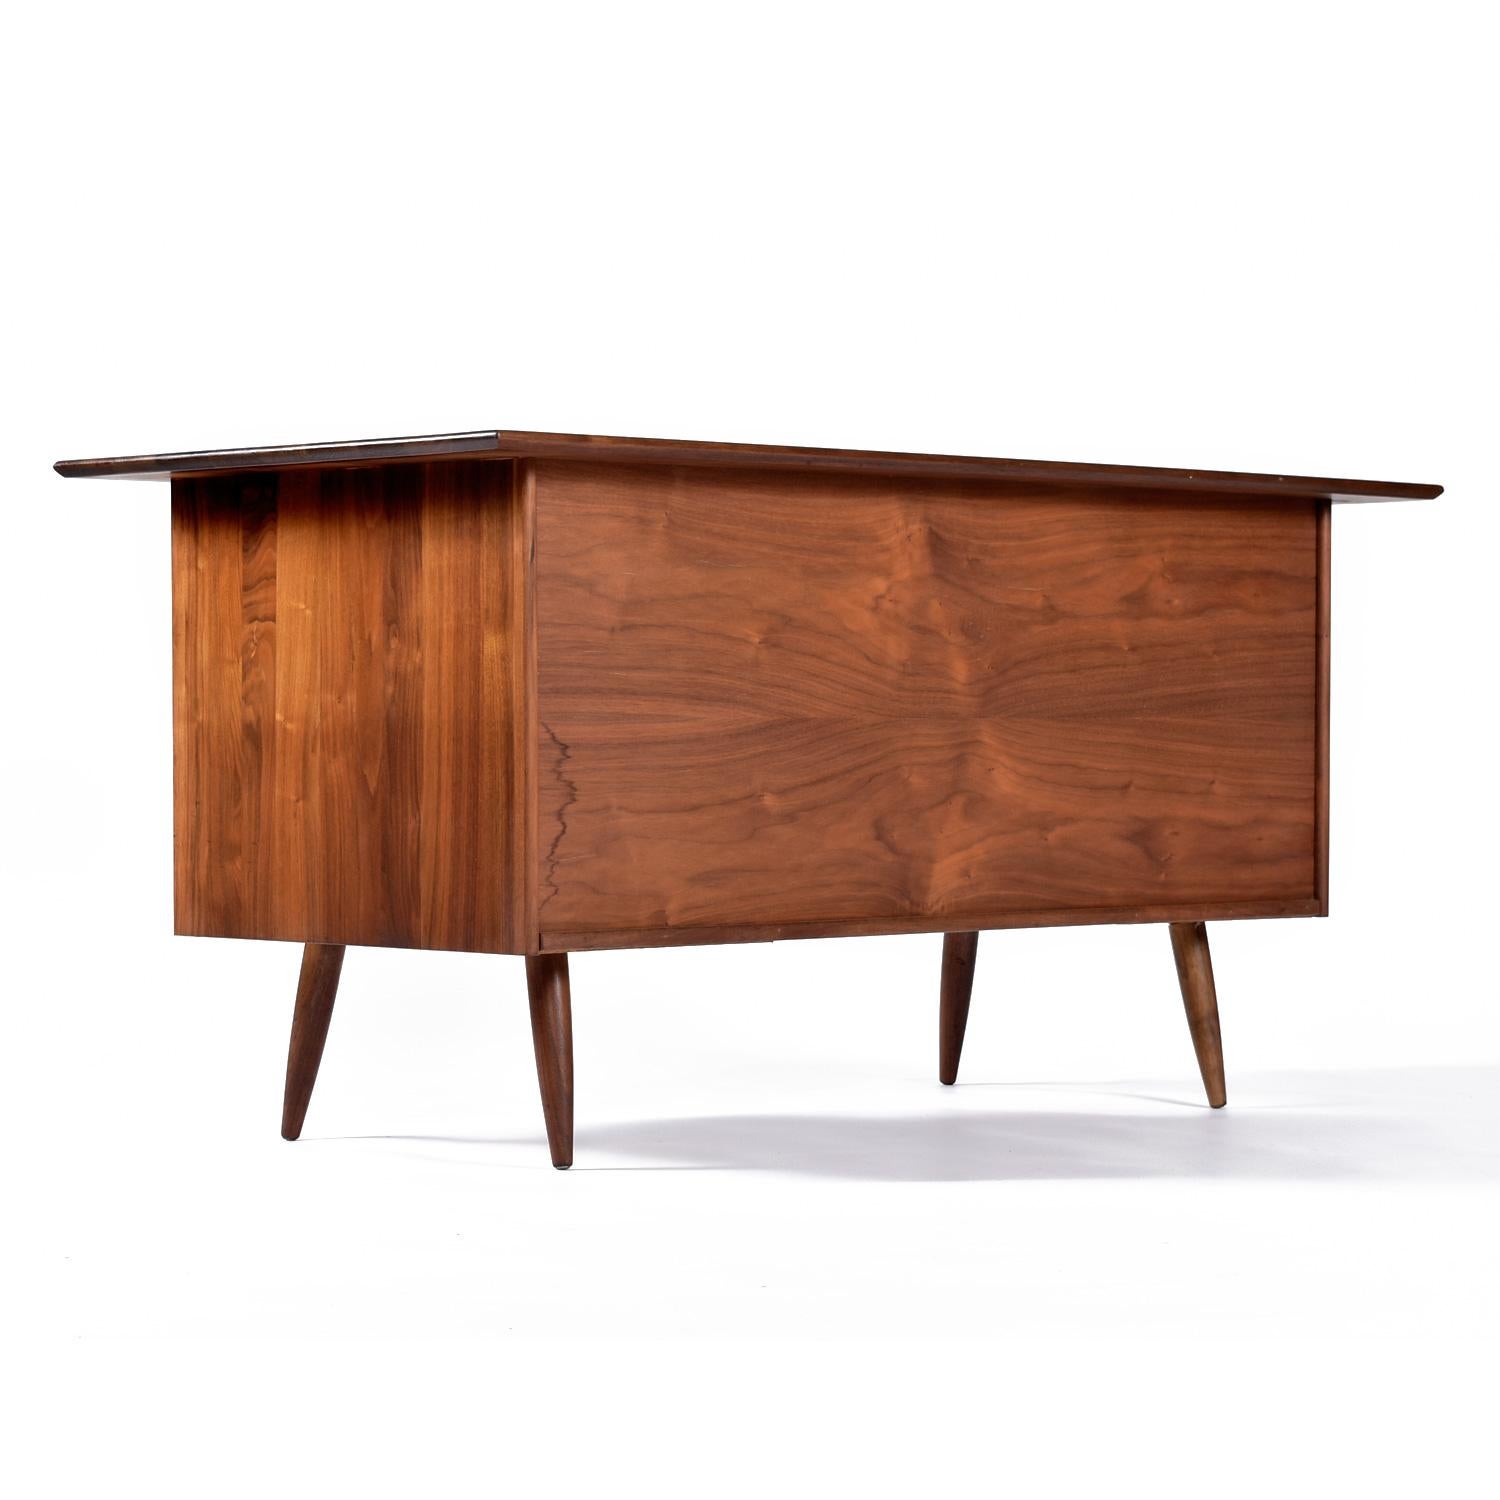 American Solid Walnut Mid-Century Modern Desk with File Drawers